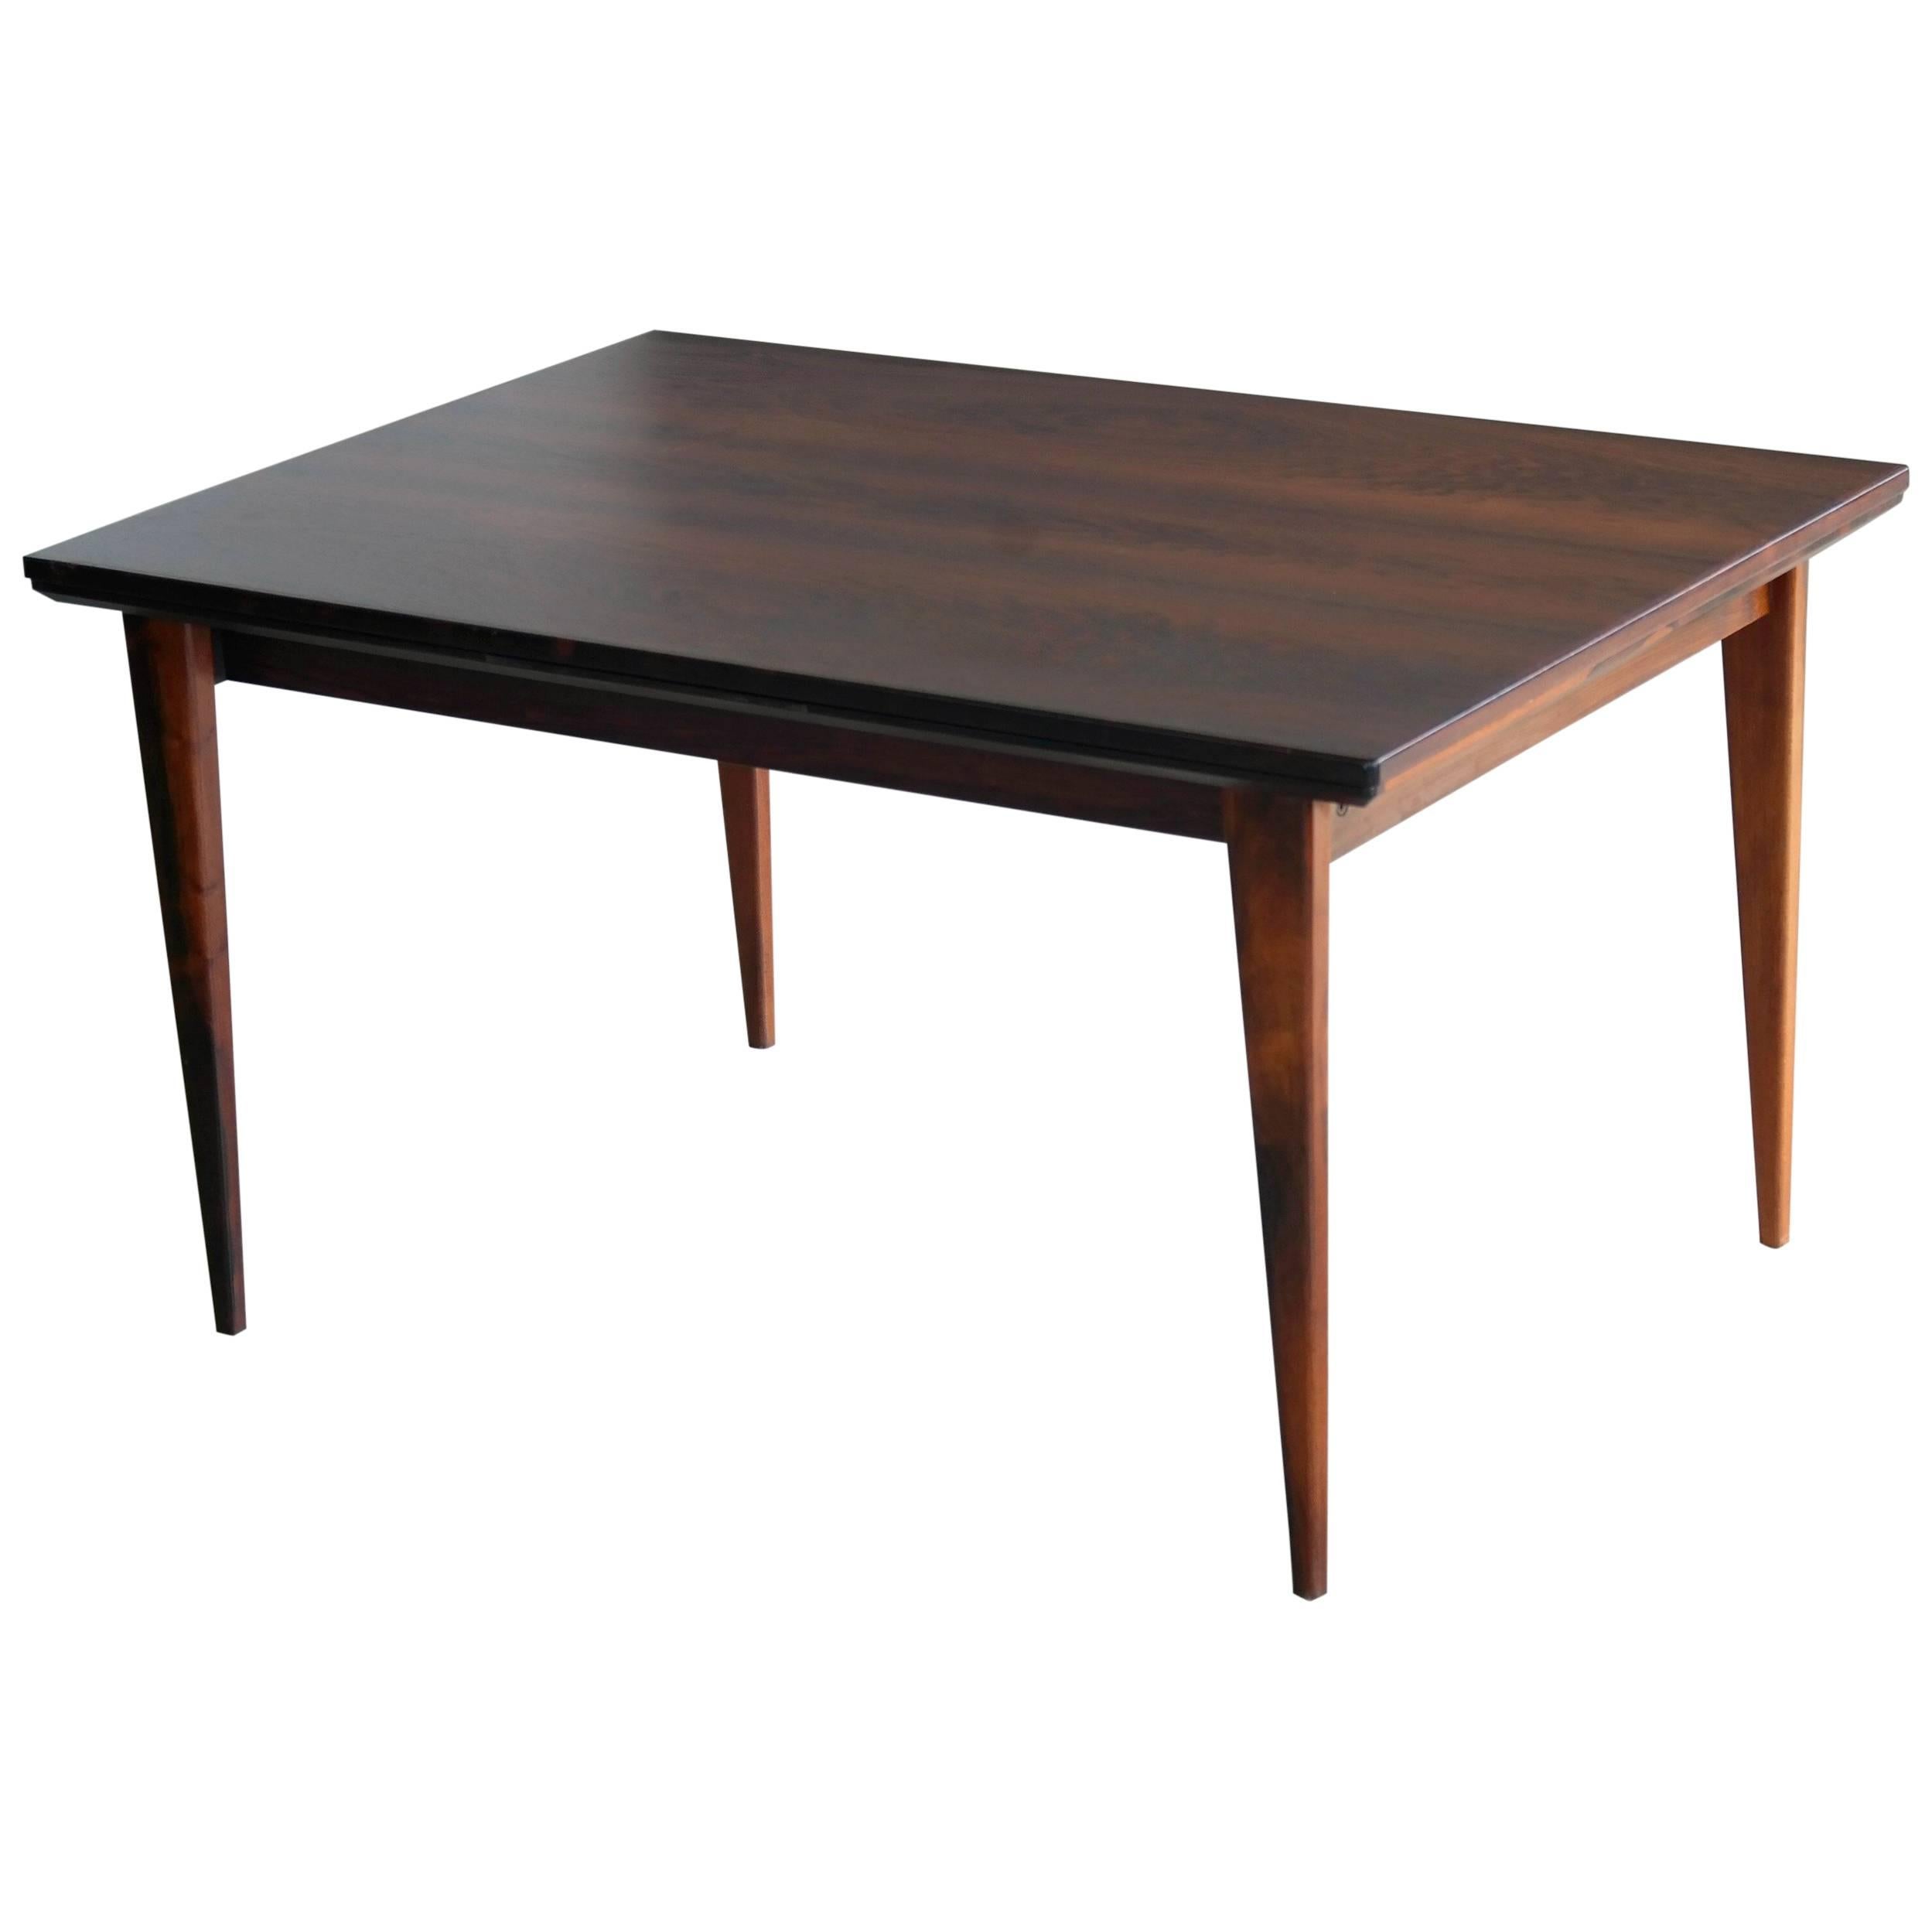 Danish Rosewood Extension Dining Table by Gudme Mobelfabrik